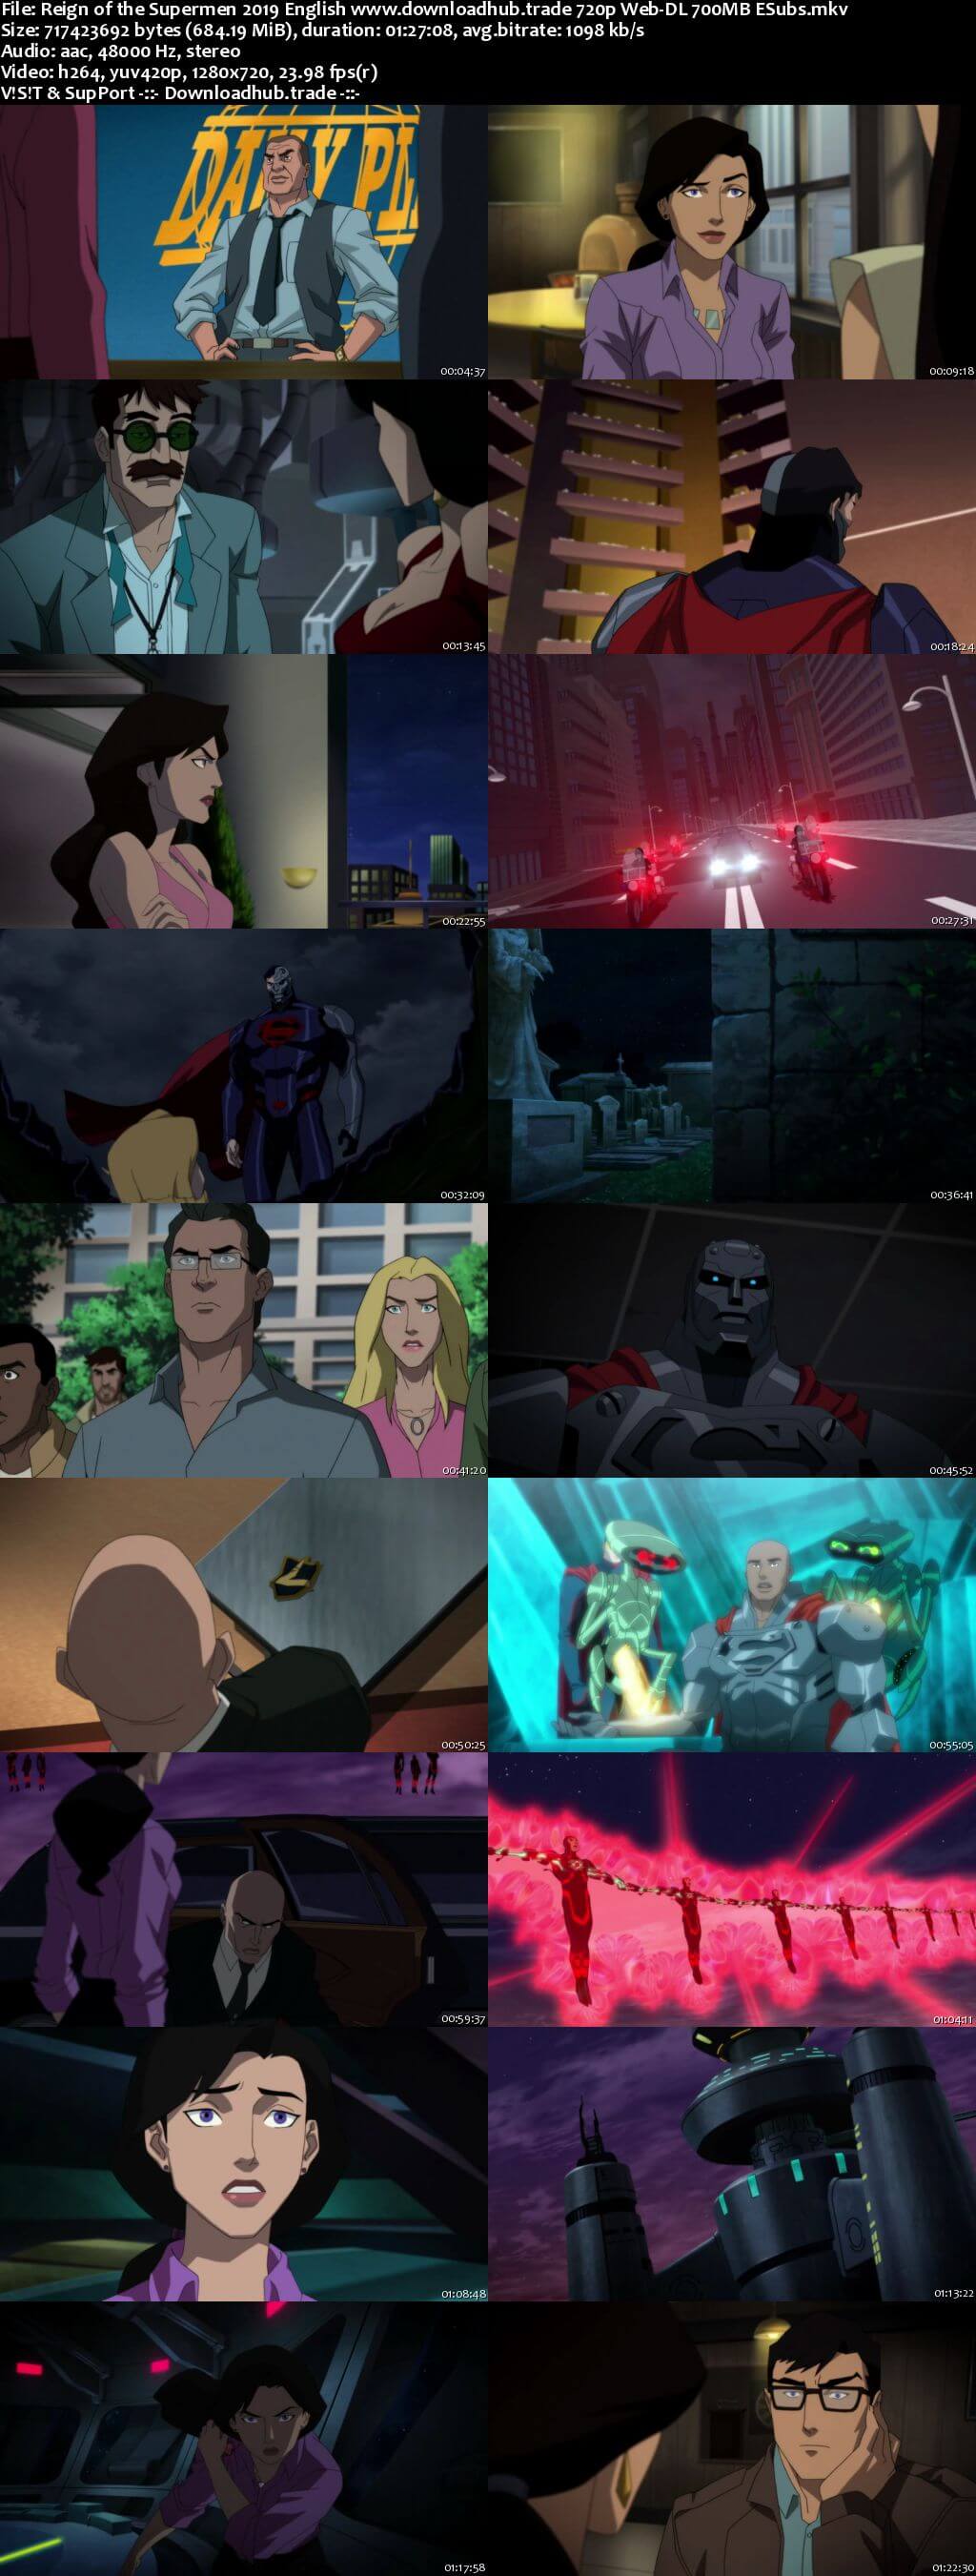 Reign of the Supermen 2019 English 720p Web-DL 700MB ESubs